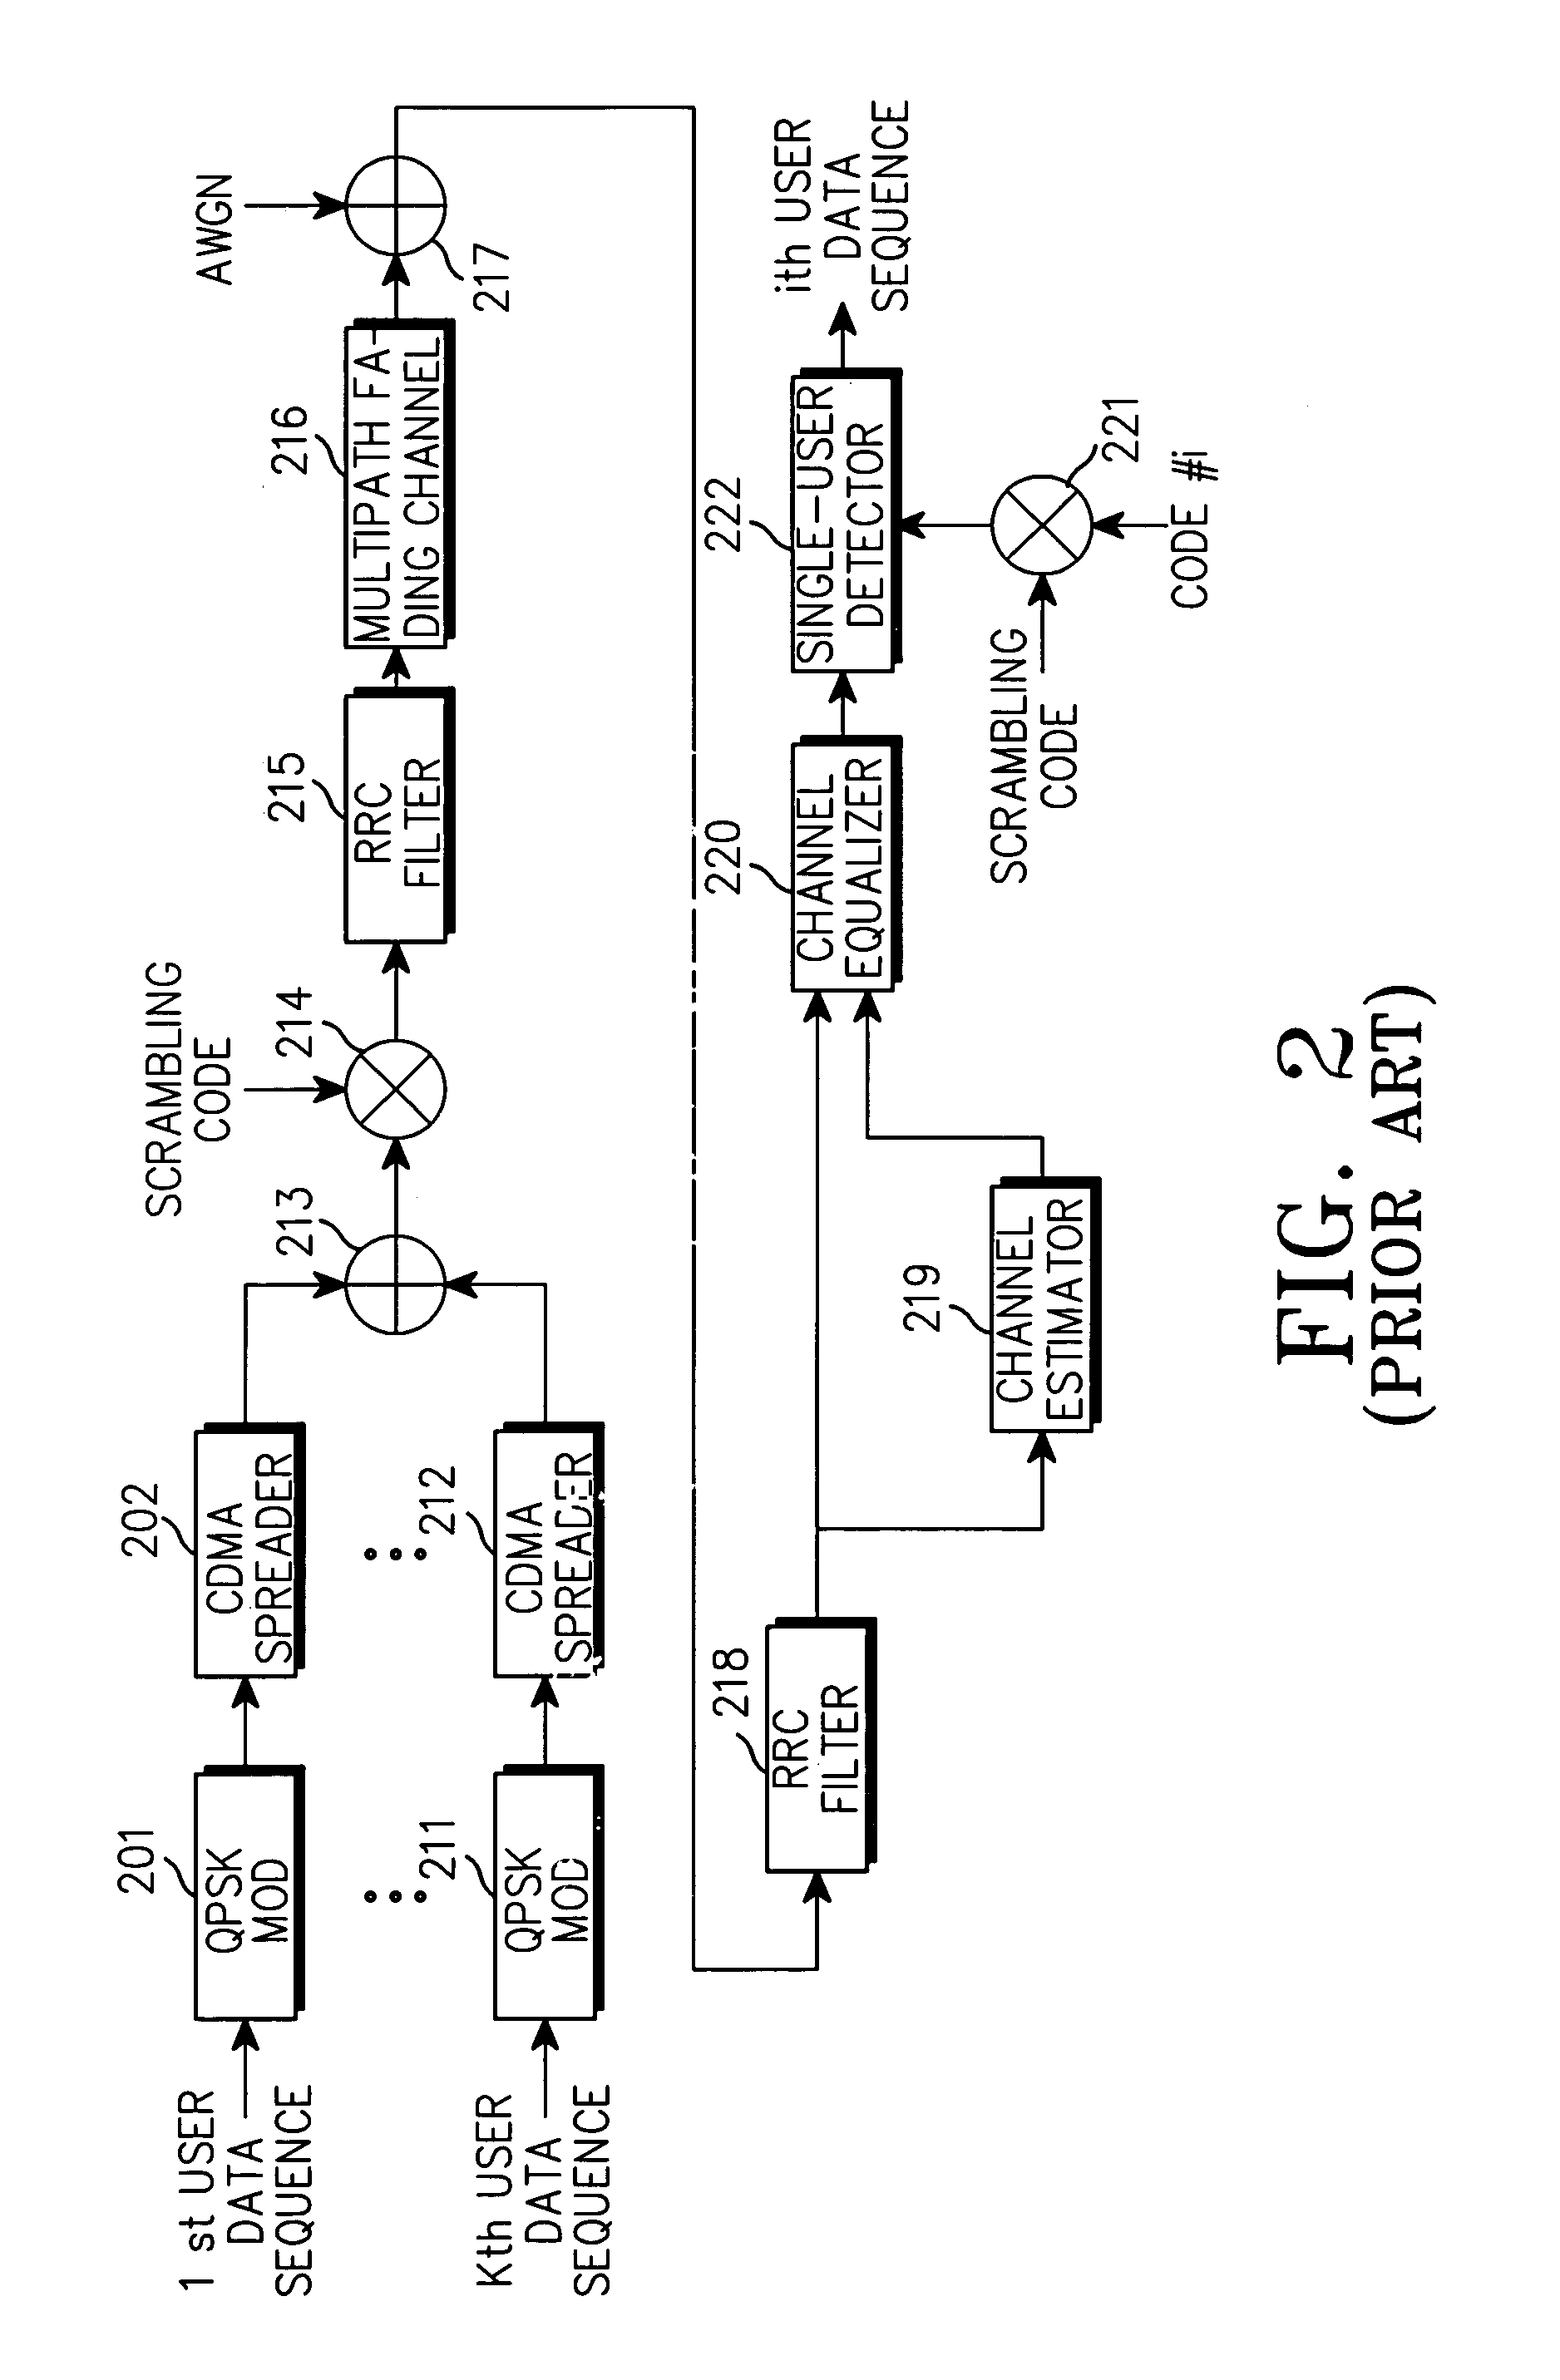 Method and apparatus for downlink joint detection in a communication system